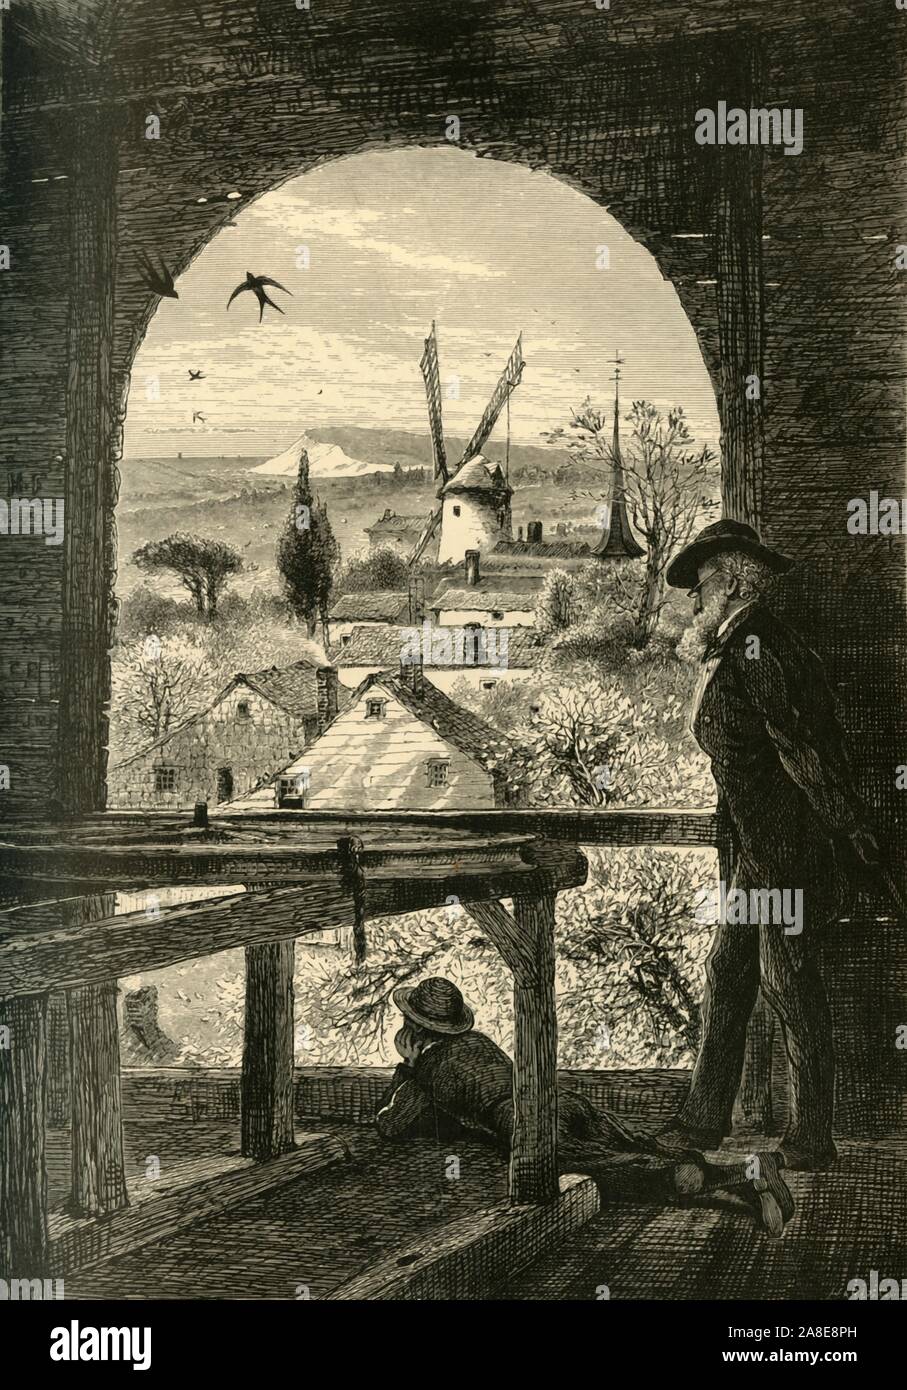 'East Hampton, from the Church Belfry', 1872. View of Hook Windmill, built in 1806, in the town of East Hampton, New York State, USA. From &quot;Picturesque America; or, The Land We Live In, A Delineation by Pen and Pencil of the Mountains, Rivers, Lakes...with Illustrations on Steel and Wood by Eminent American Artists&quot; Vol. I, edited by William Cullen Bryant. [D. Appleton and Company, New York, 1872] Stock Photo